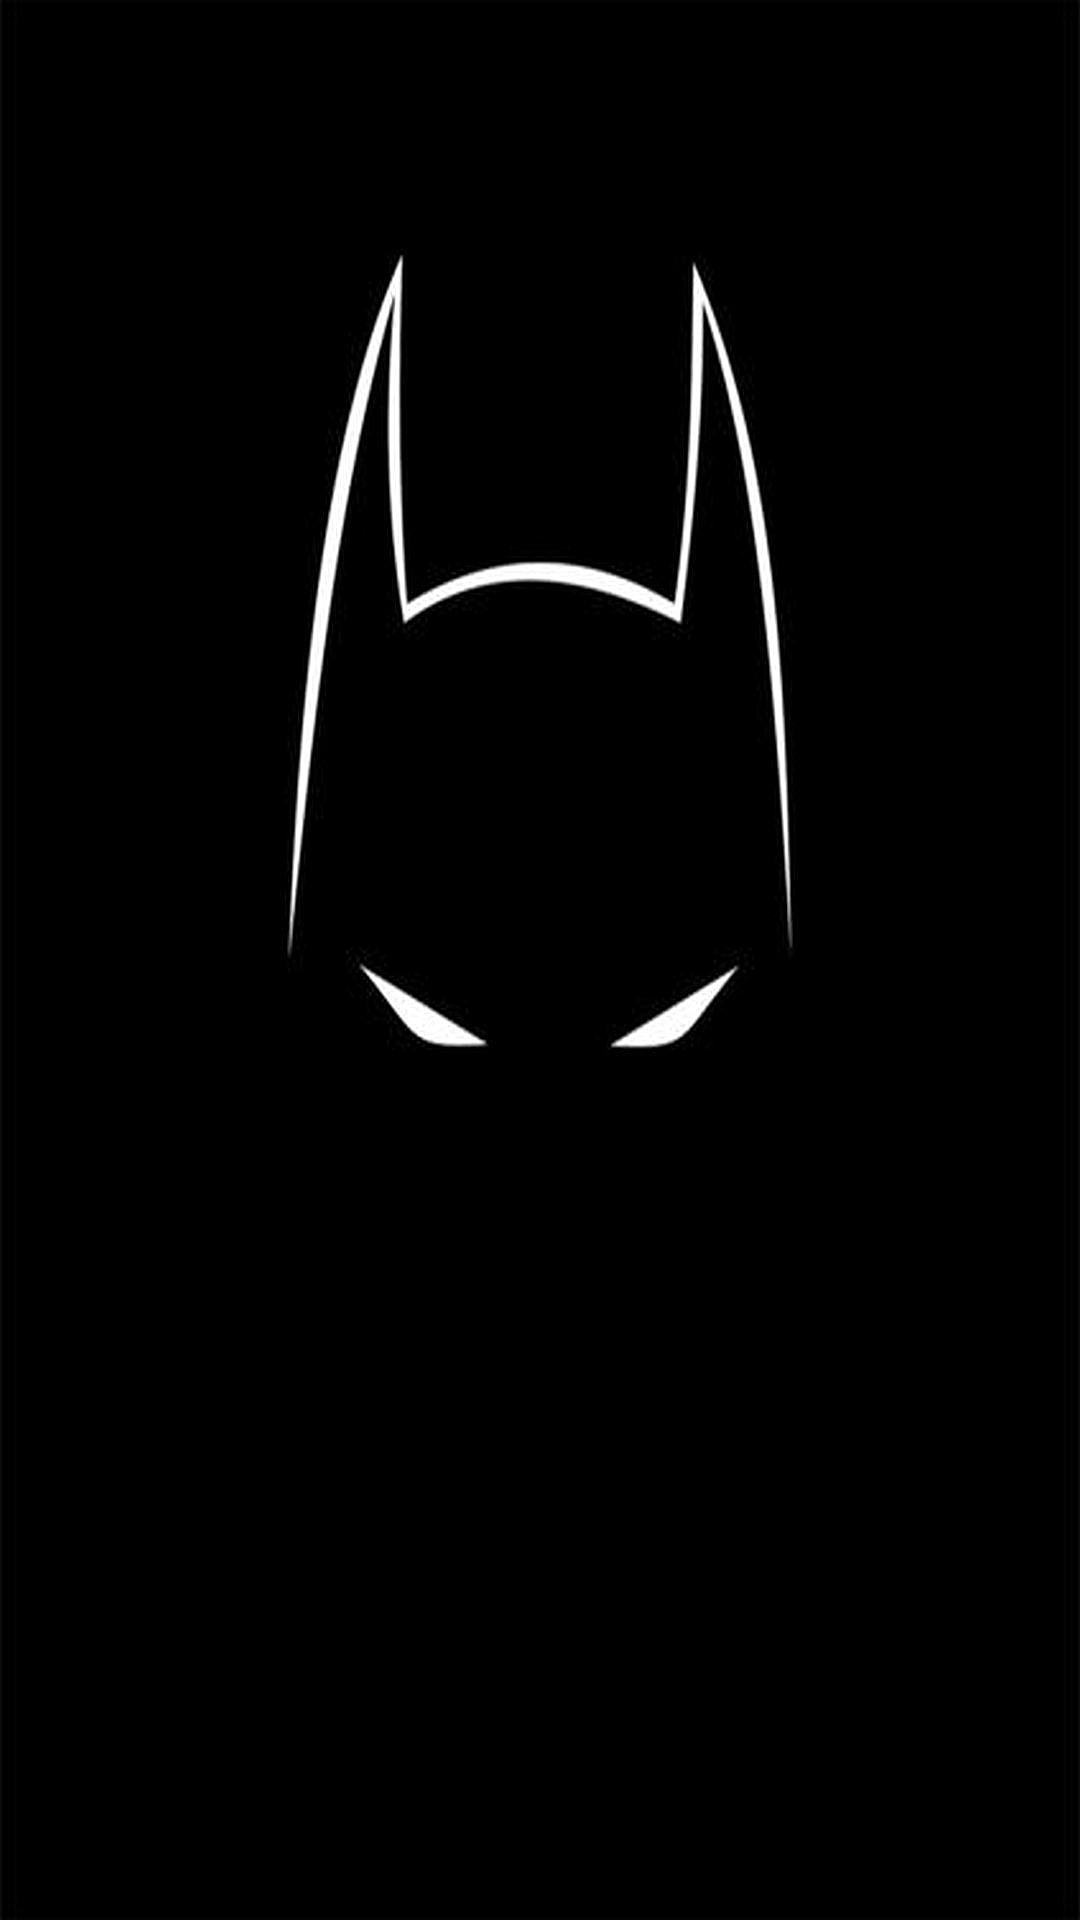 Batman Background For Android With high-resolution 1080X1920 pixel. You can use this wallpaper for your Desktop Computer Backgrounds, Mac Wallpapers, Android Lock screen or iPhone Screensavers and another smartphone device